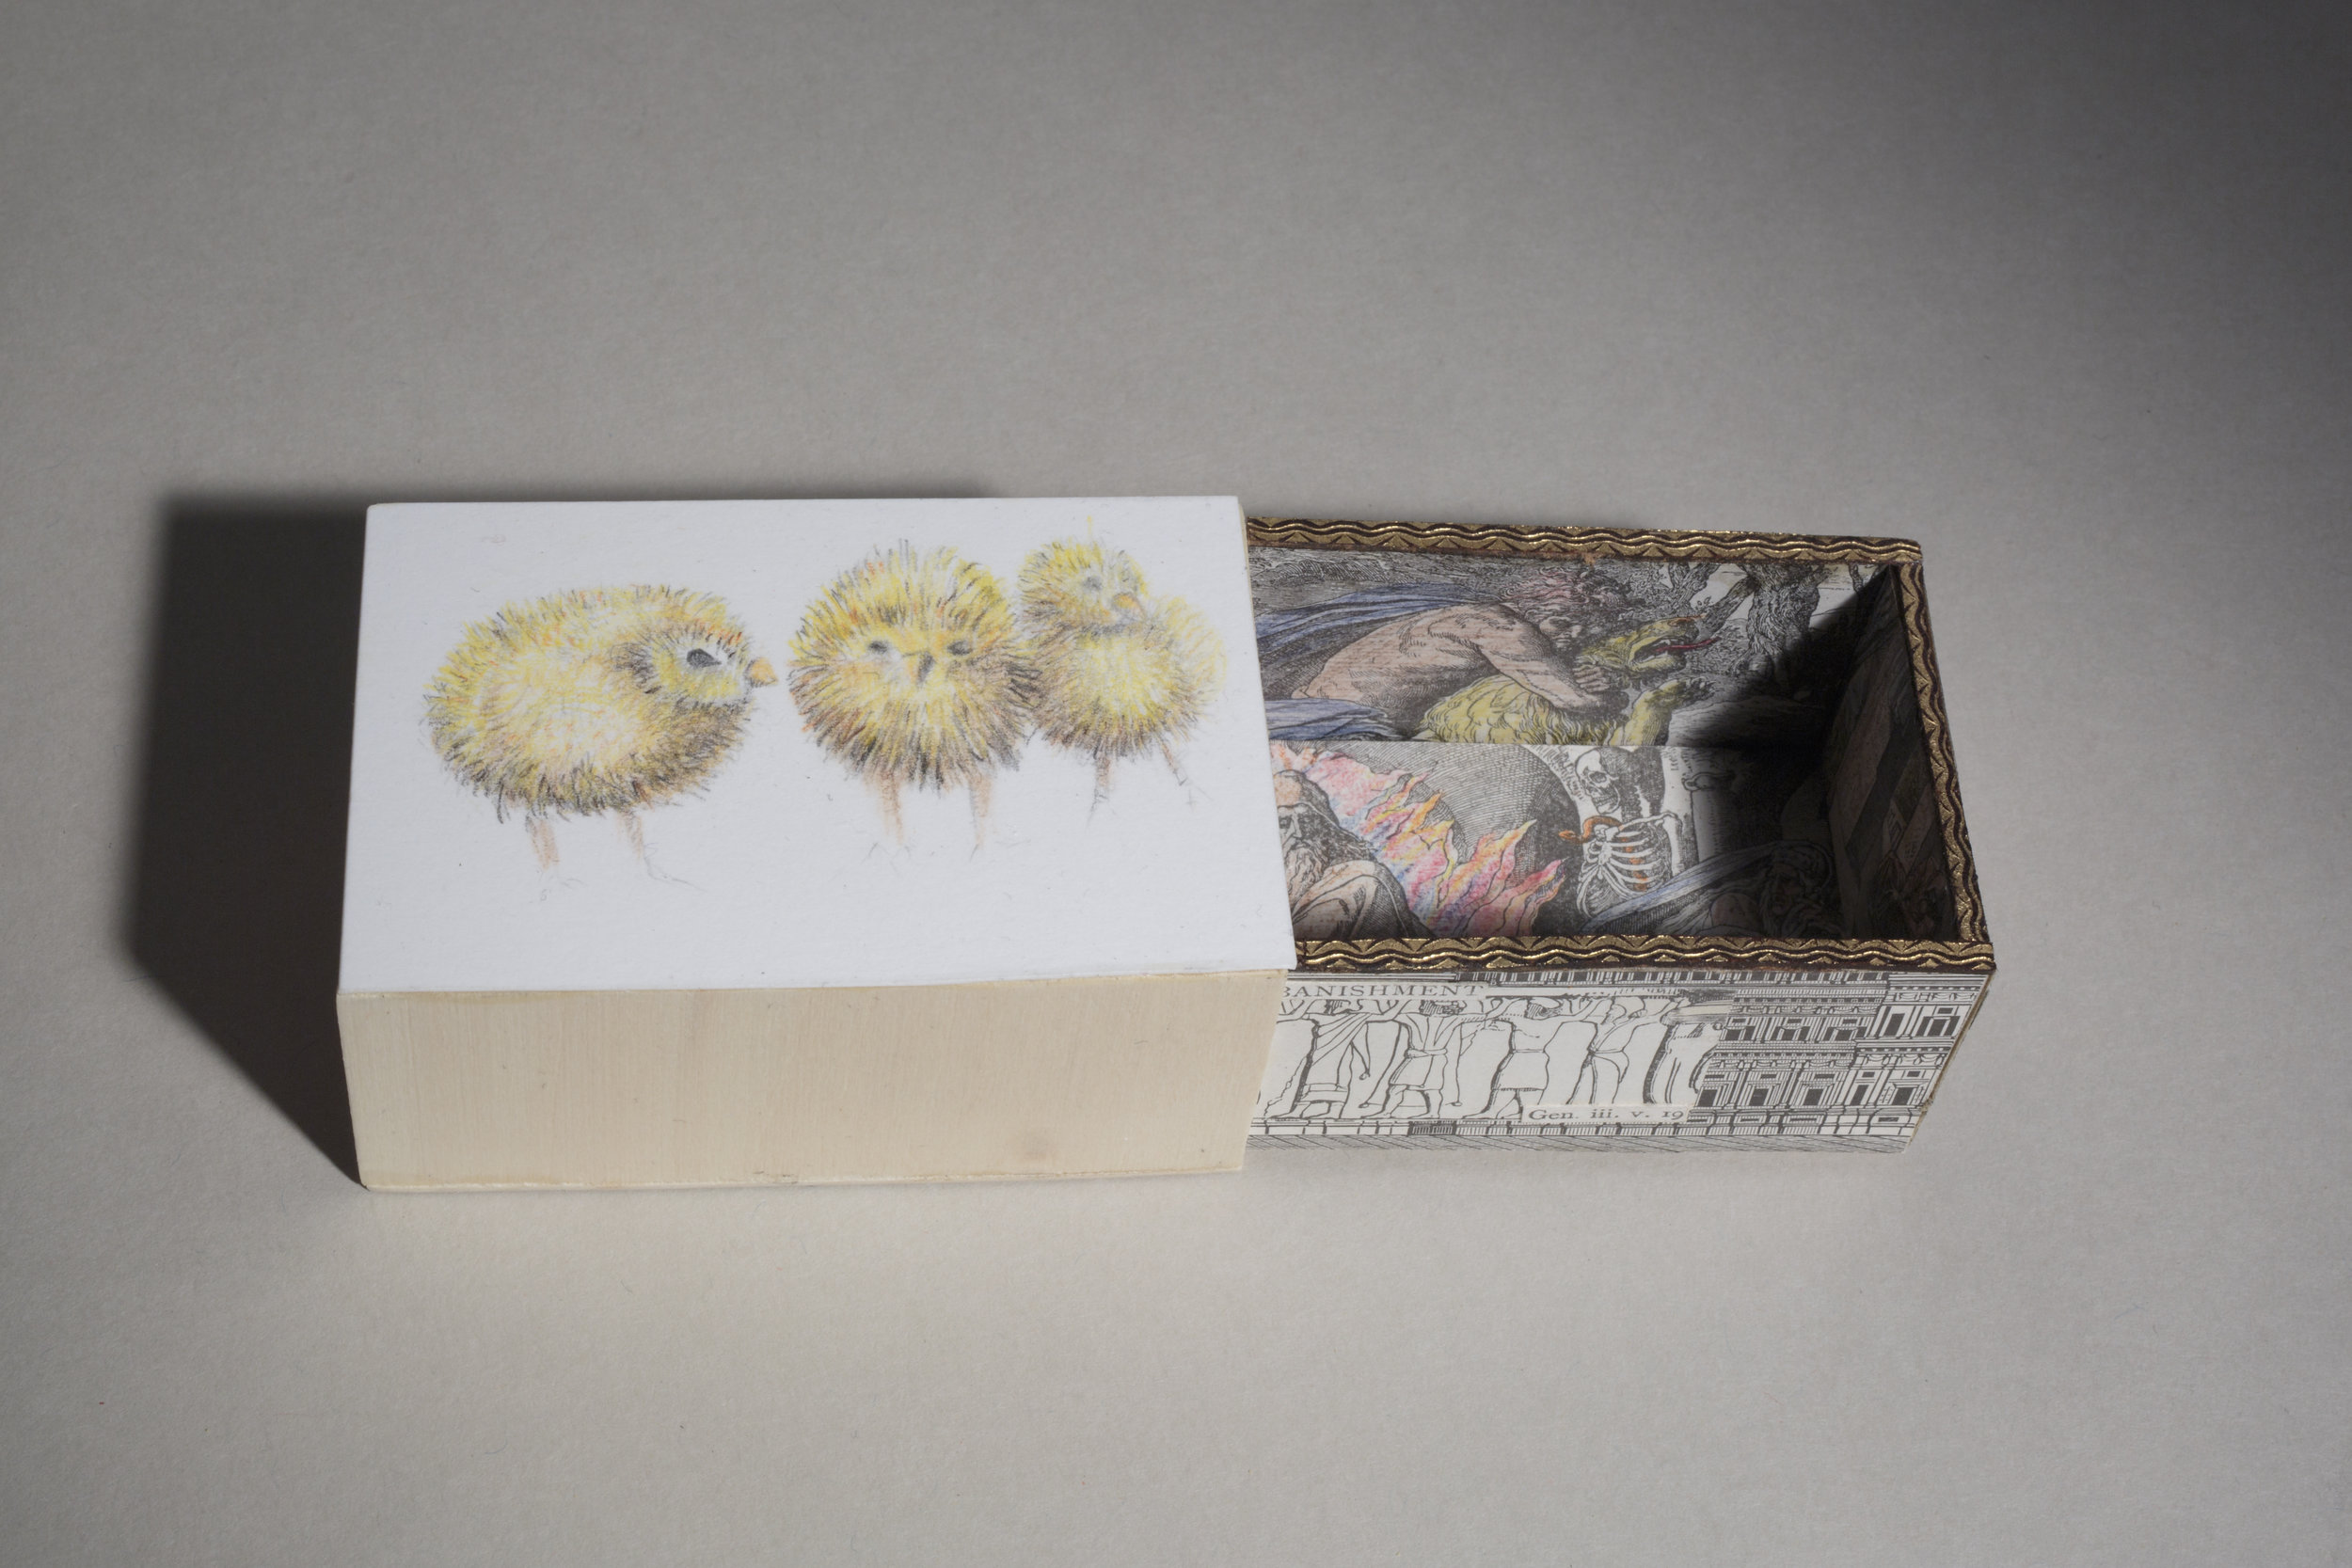   KEEPERS OF MY SECRETS: CHICKS   Bass wood, graphite, colored pencil  5" x 2.5" x 2" 